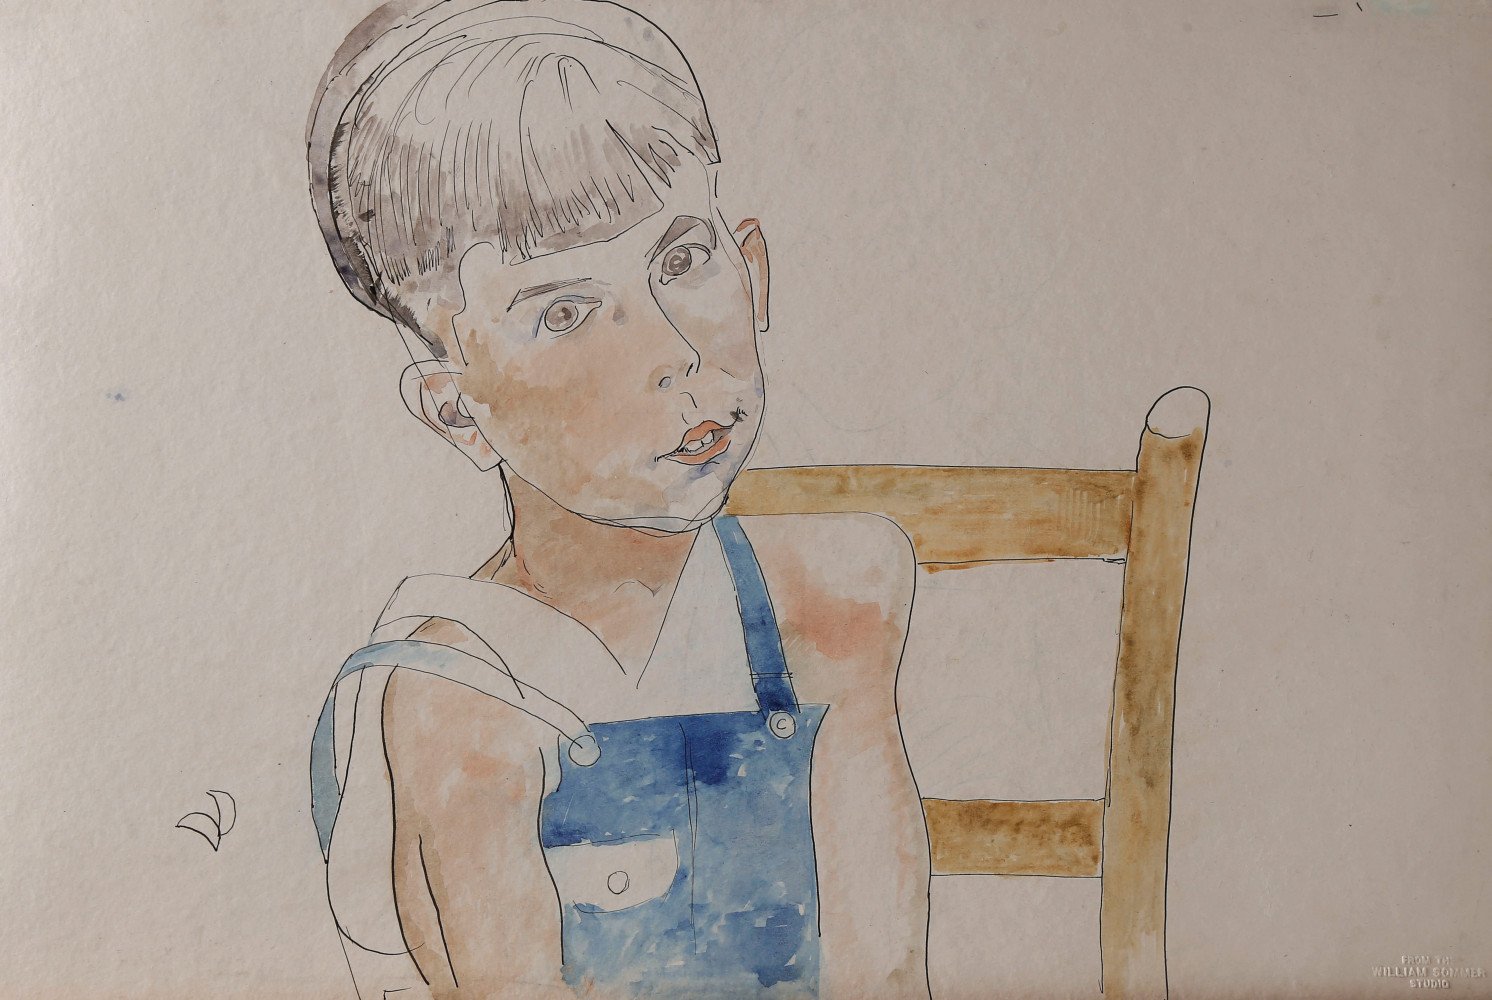 Boy in Blue Overalls by William Sommer